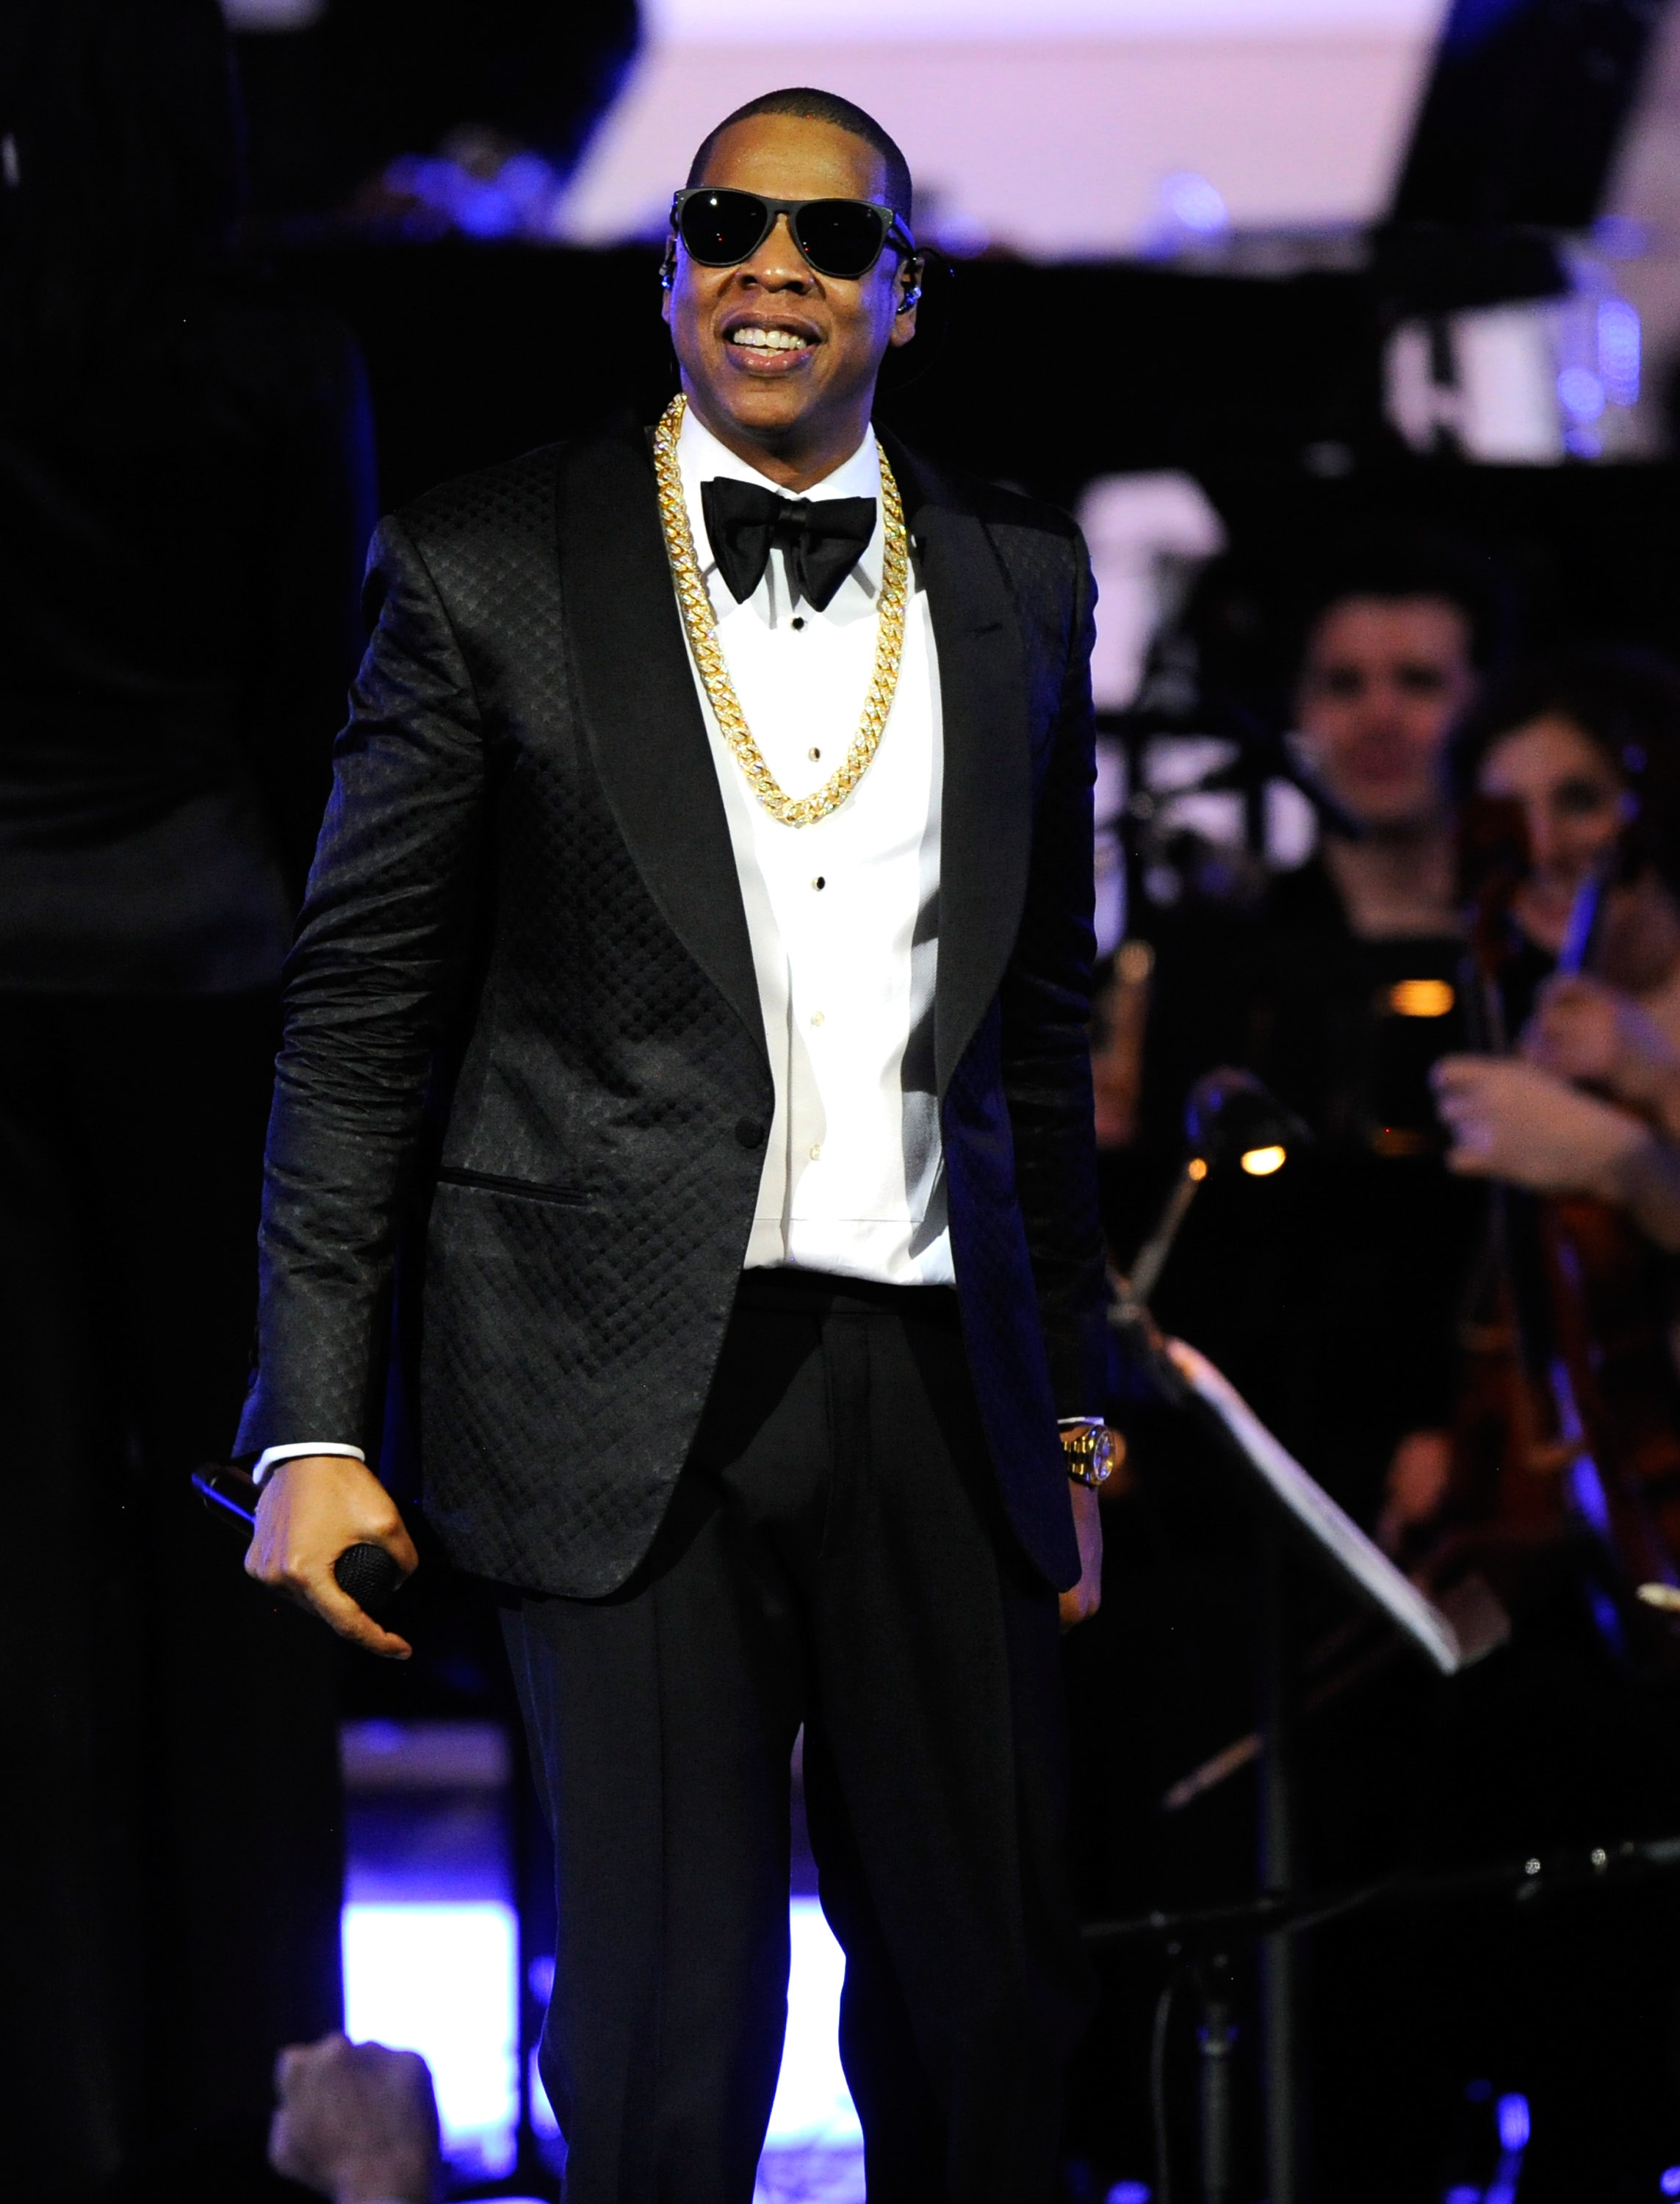 Jay-Z Performs at Carnegie Hall to Benefit the United Way of New York City and the Shawn Carter Foundation - Show - February 7, 2012